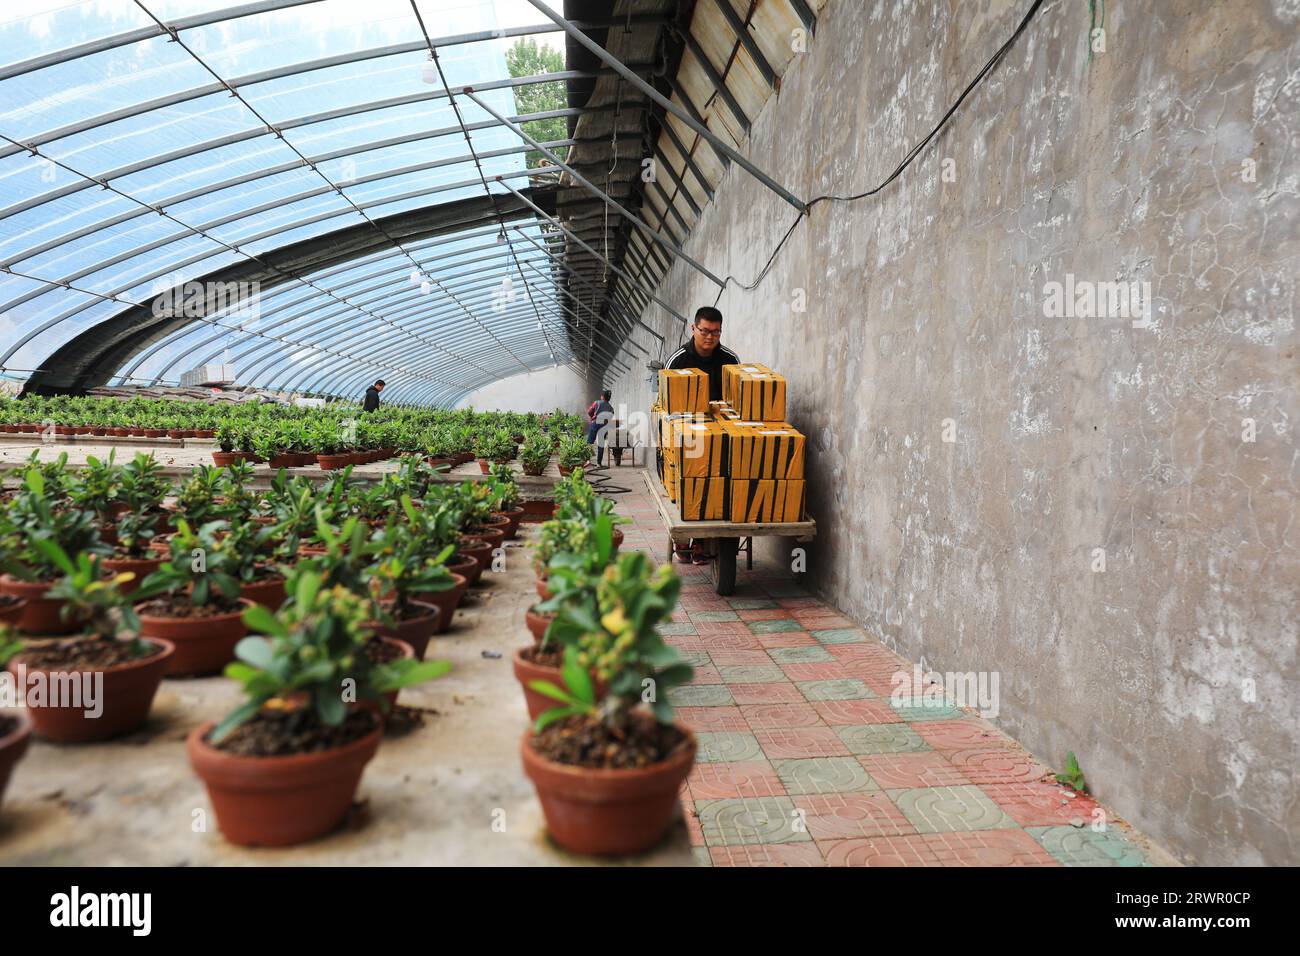 LUANNAN COUNTY, China - May 10, 2022: The gardener is carrying the packing box of Pyracantha bonsai in a nursery, North China Stock Photo